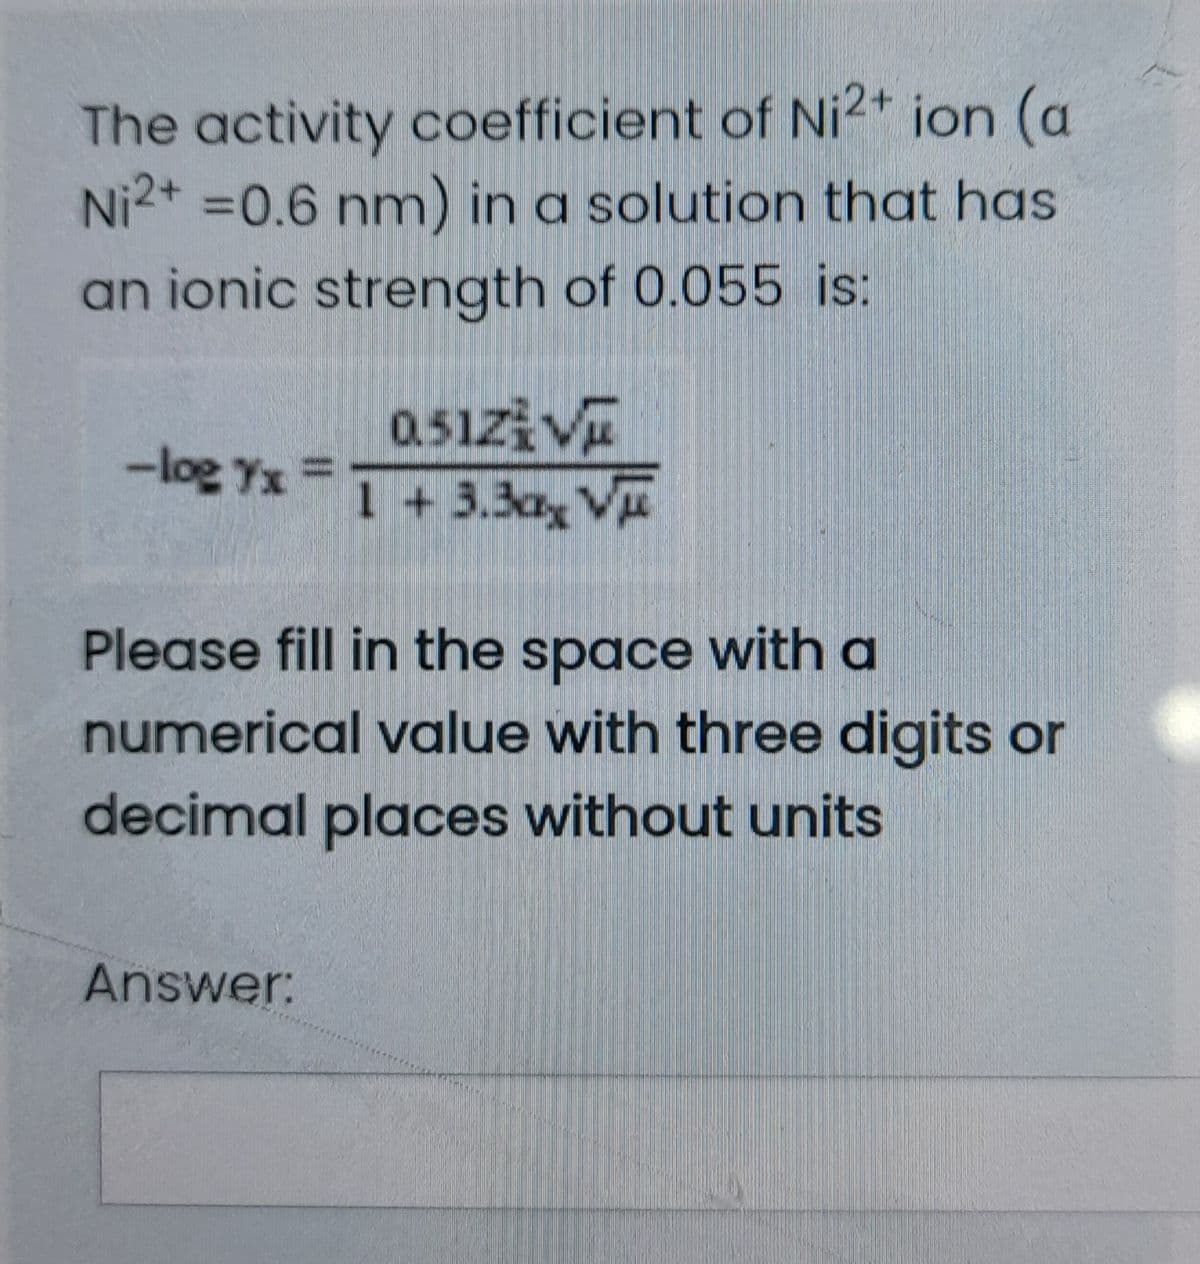 The activity coefficient of Ni2+ ion (a
Ni2+ =0.6 nm) in a solution that has
an ionic strength of 0.055 is:
0.51zi Vu
1 + 3.3ax V
-log Yx =
Please fill in the space with a
numerical value with three digits or
decimal places without units
Answer:
